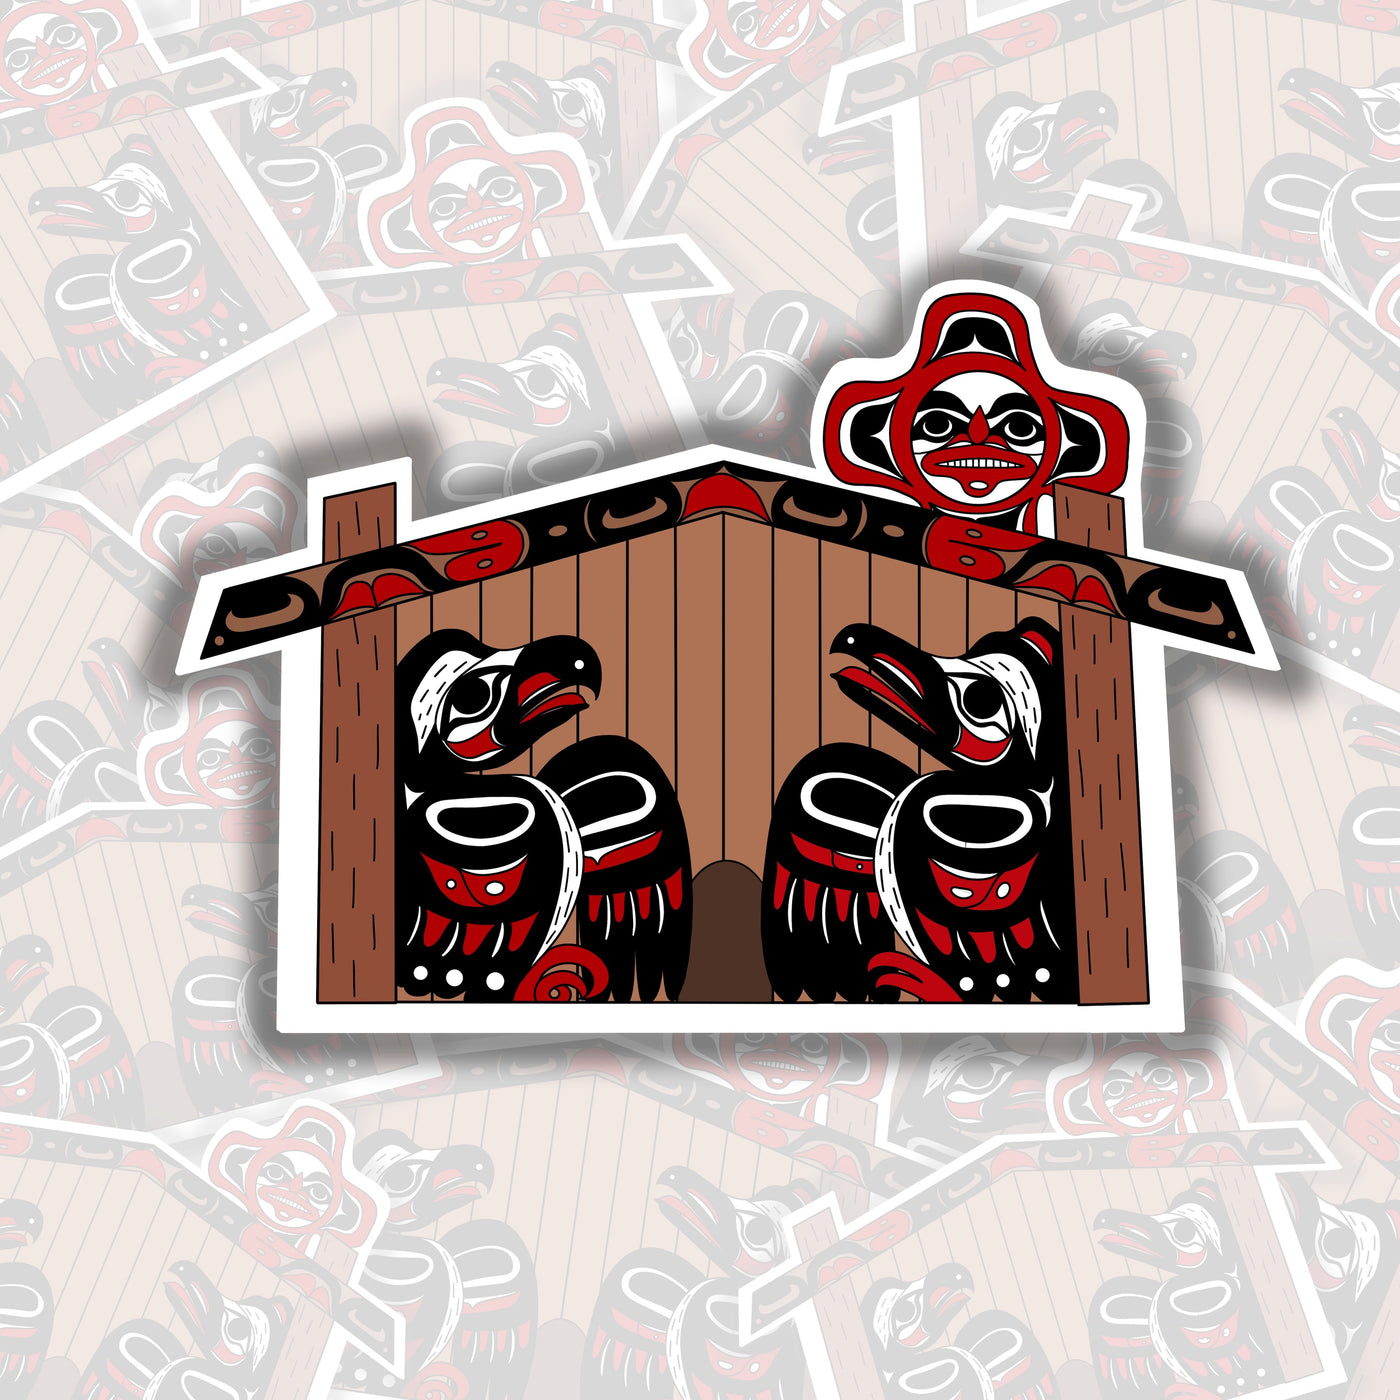 This sticker is of a tan, black, and red Tlingit longhouse. Inside the longhouse are two birds, an eagle on the left and a raven on the right. Above the longhouse is a red and black sun with a face in the center.